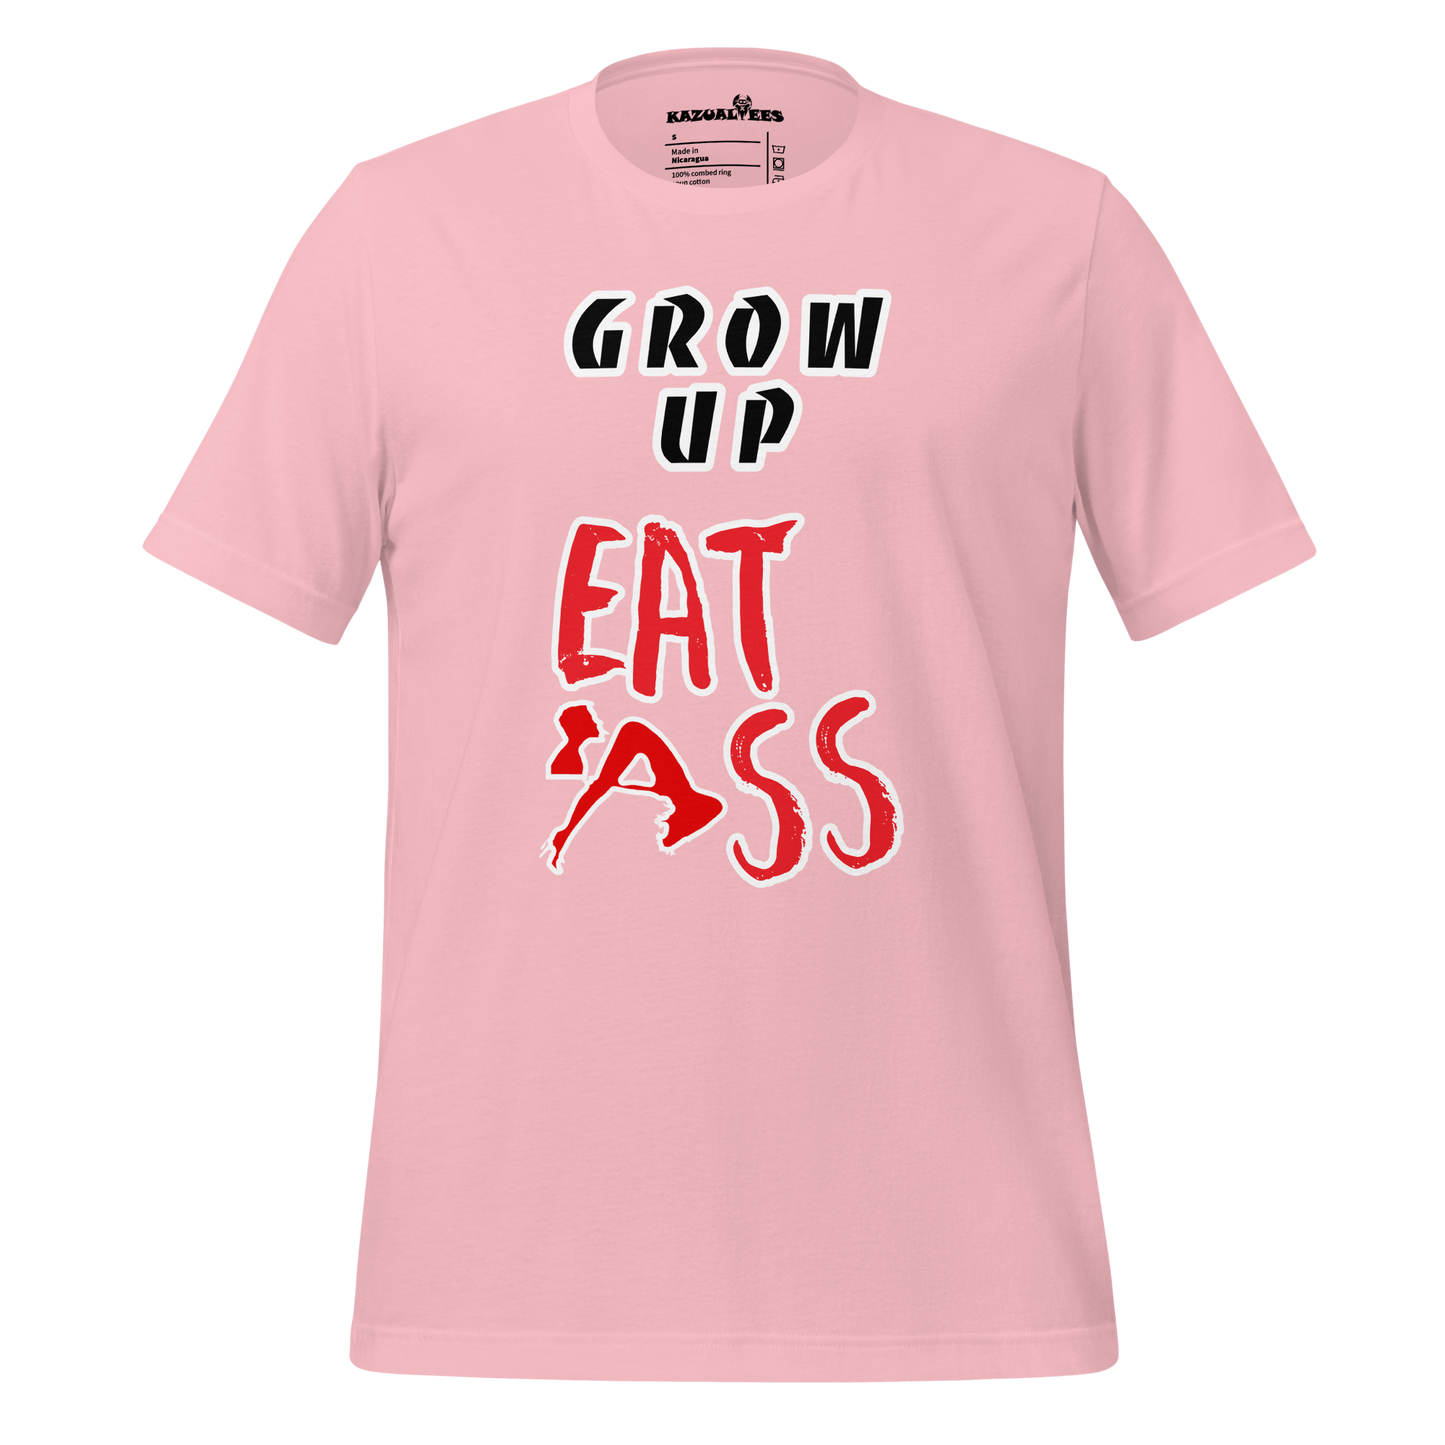 Grow Up! Eat Ass!  Maybe Throw A Few Bucks Into An ETF Or Something.